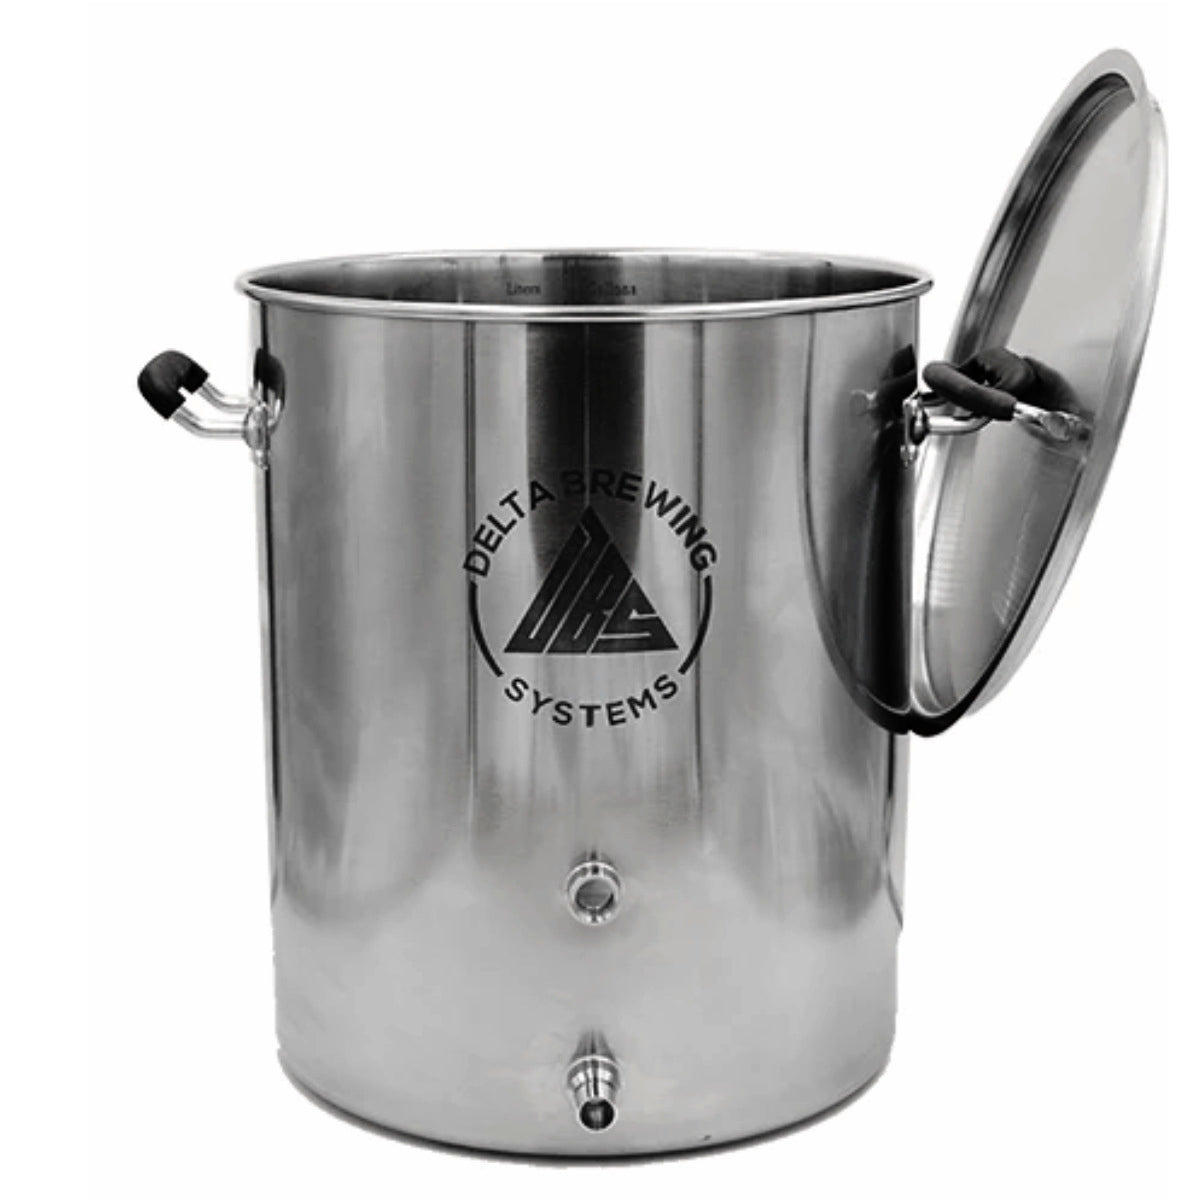 15 Gallon kettle for homebrewing - Delta Brewing Systems